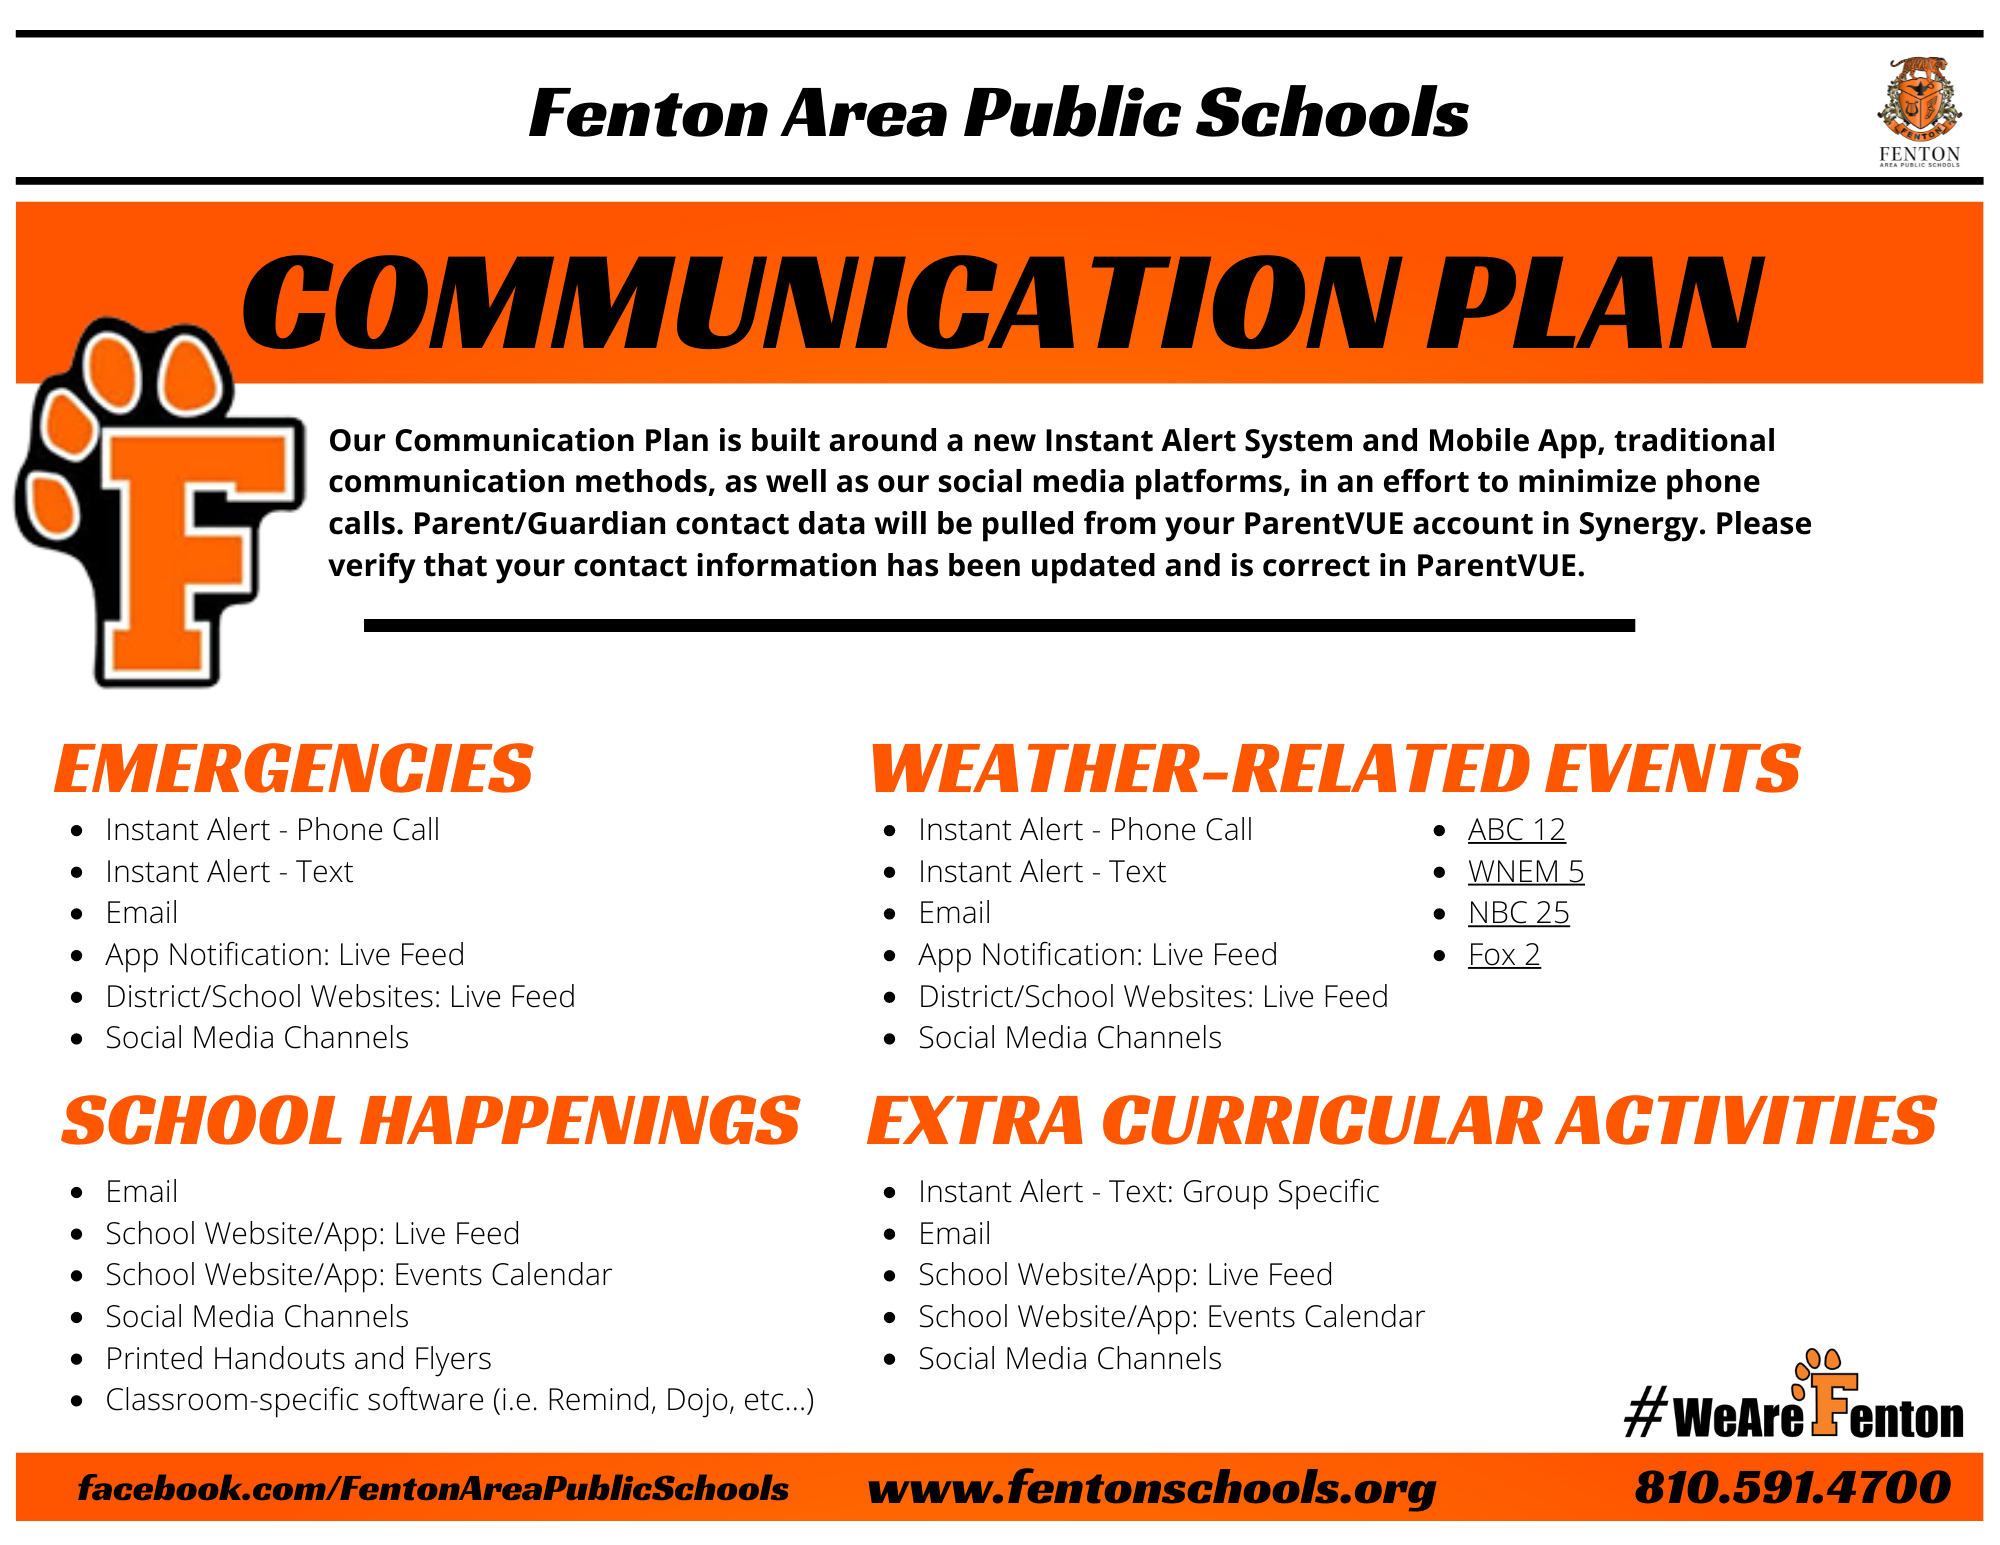 Communication Plan - 1 pager